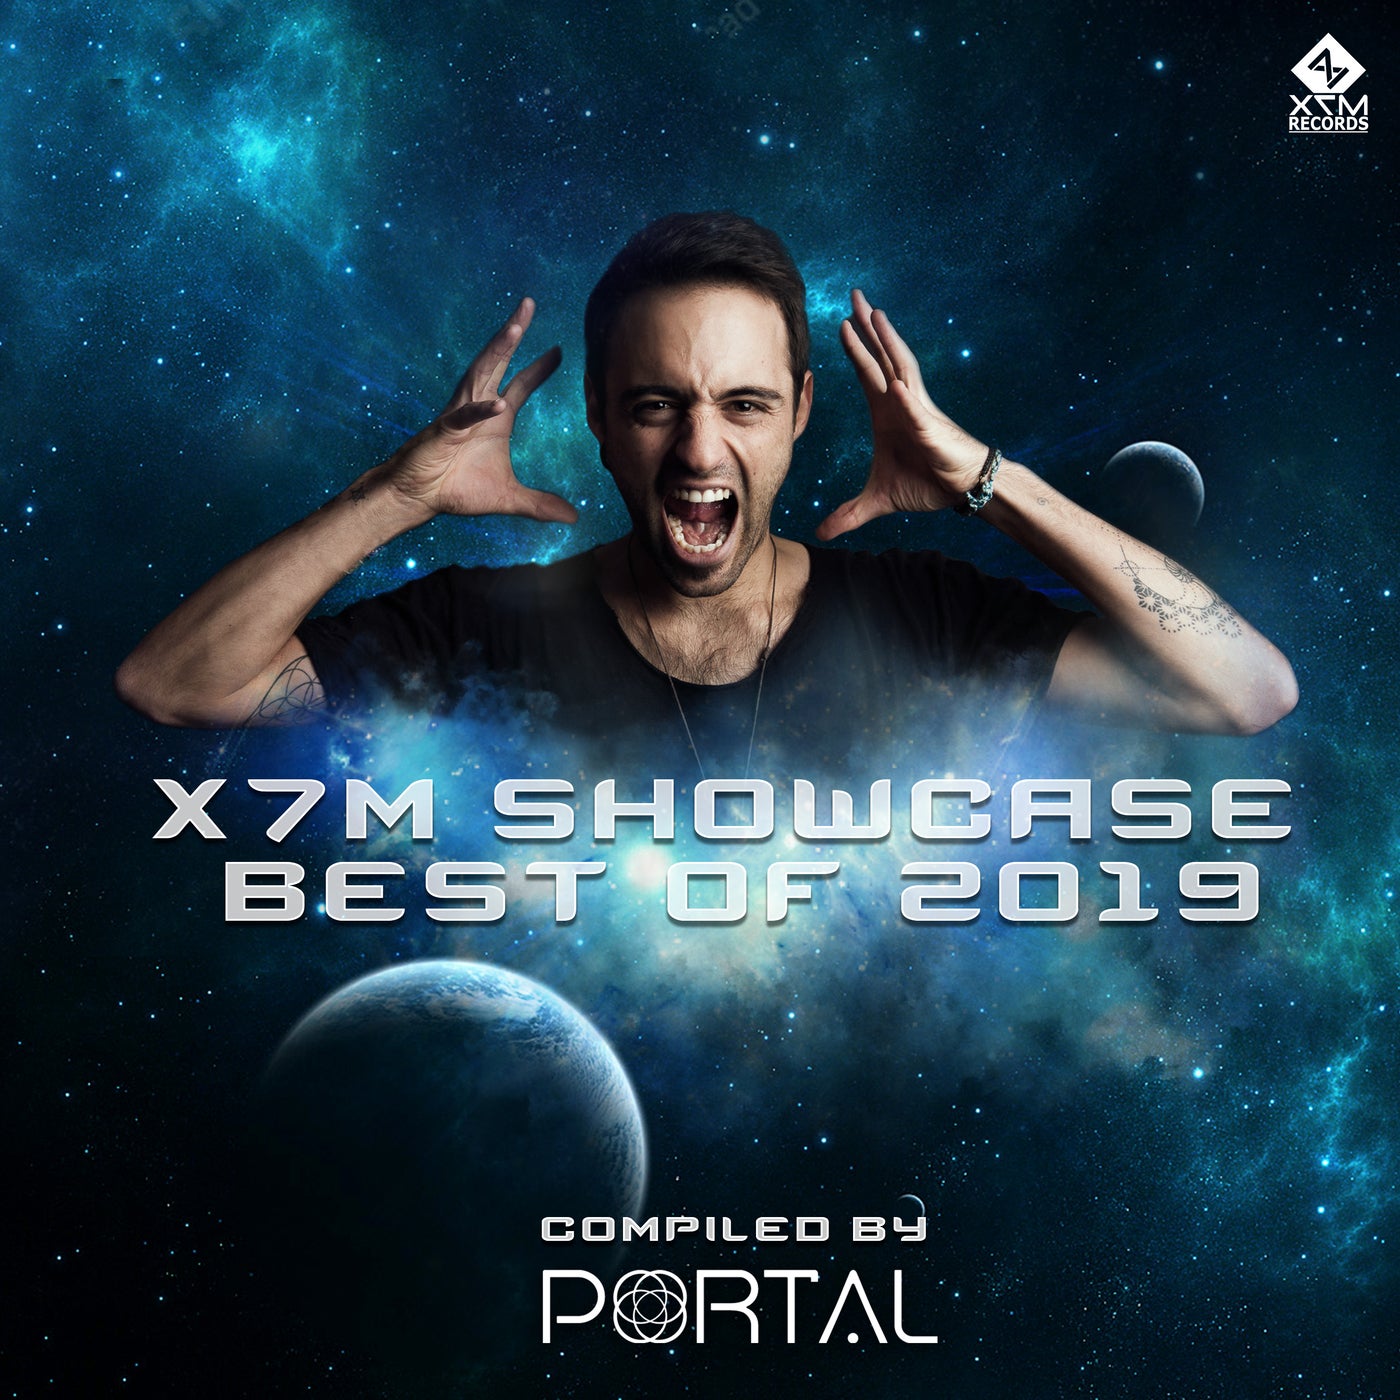 X7M Showcase: Compiled by Portal